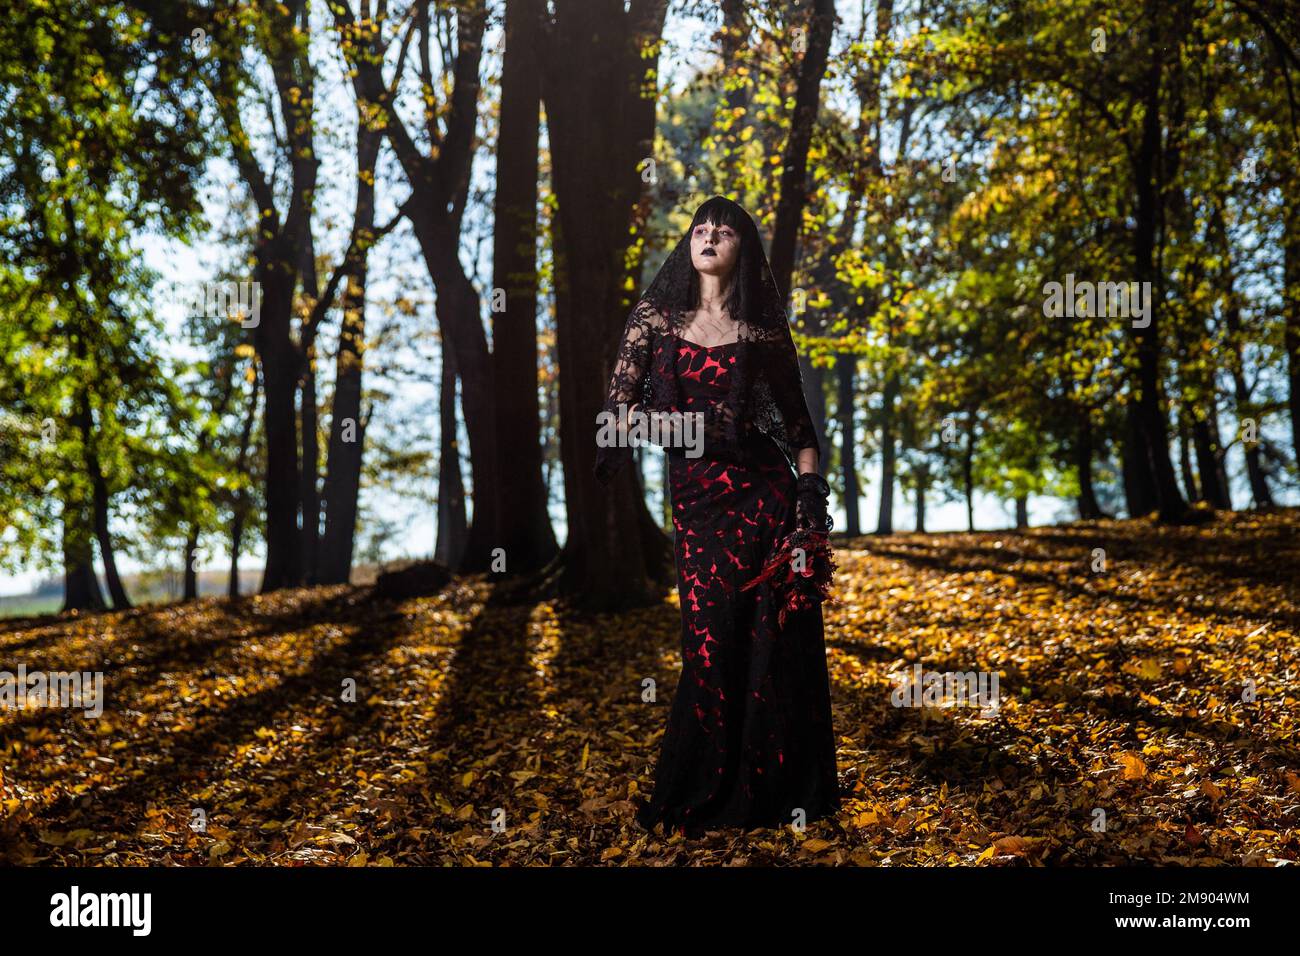 A scary corpse bride in the autumn forest Stock Photo